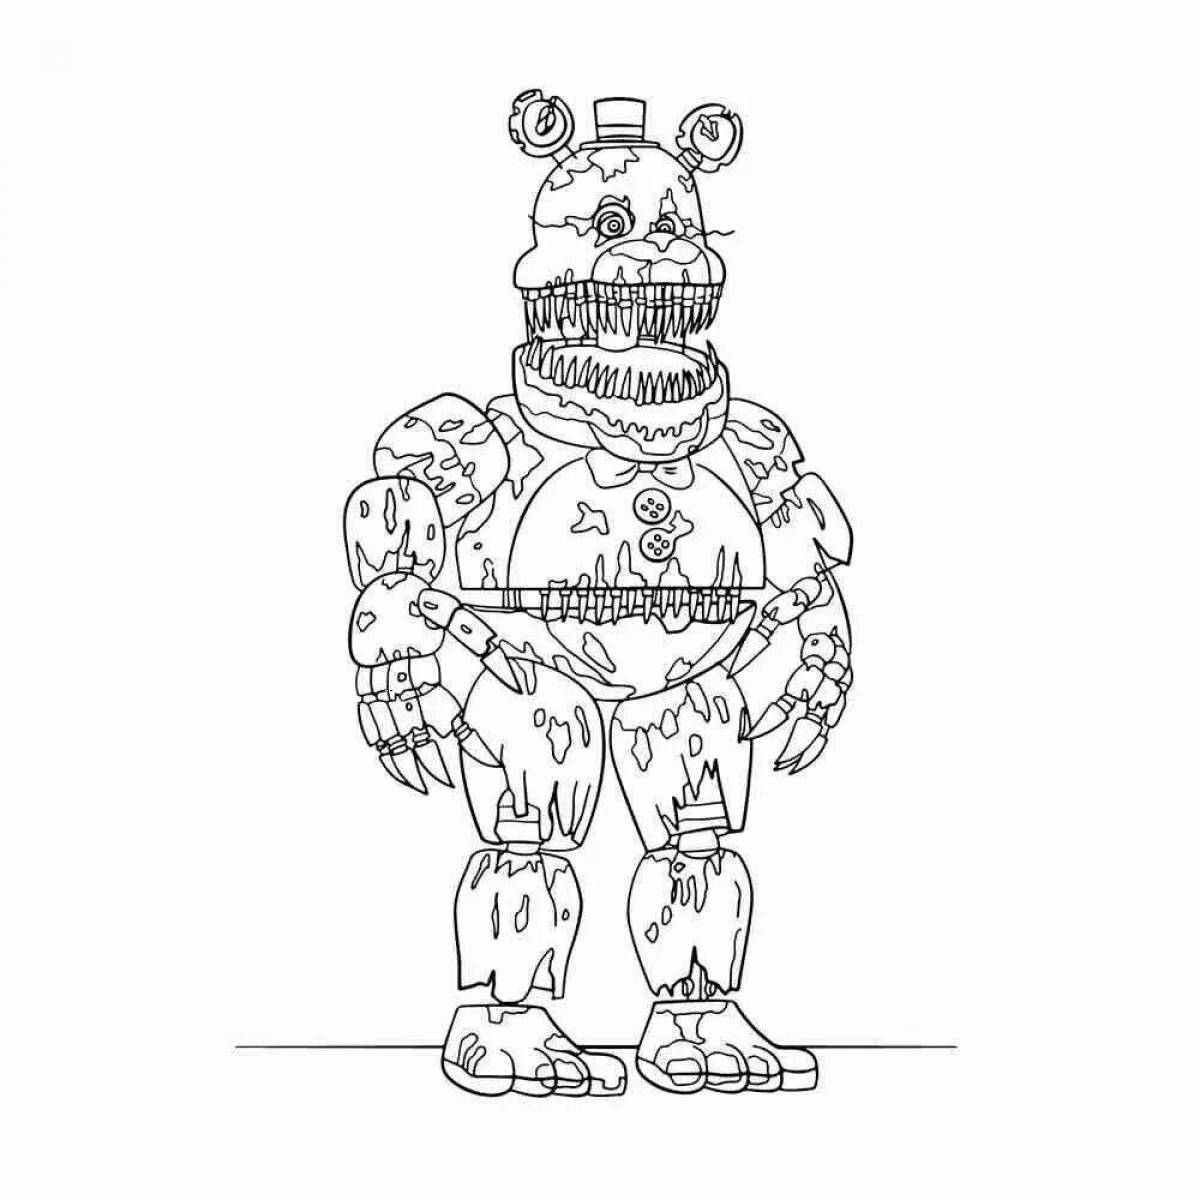 Comic chica fnaf 1 coloring book